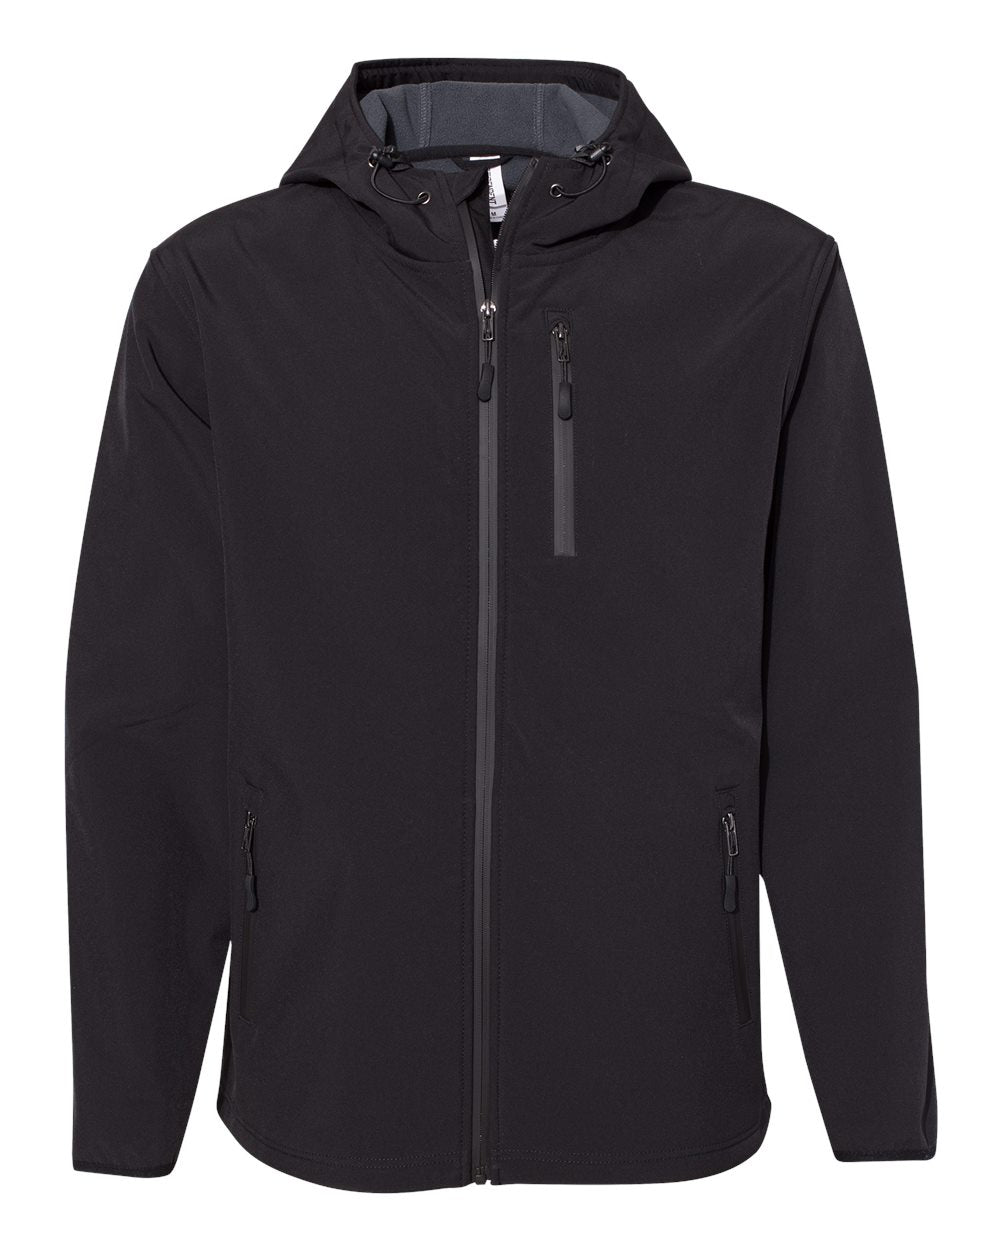 fully customizable independent poly-tech soft shell zipper jacket in multiple sizes and colors